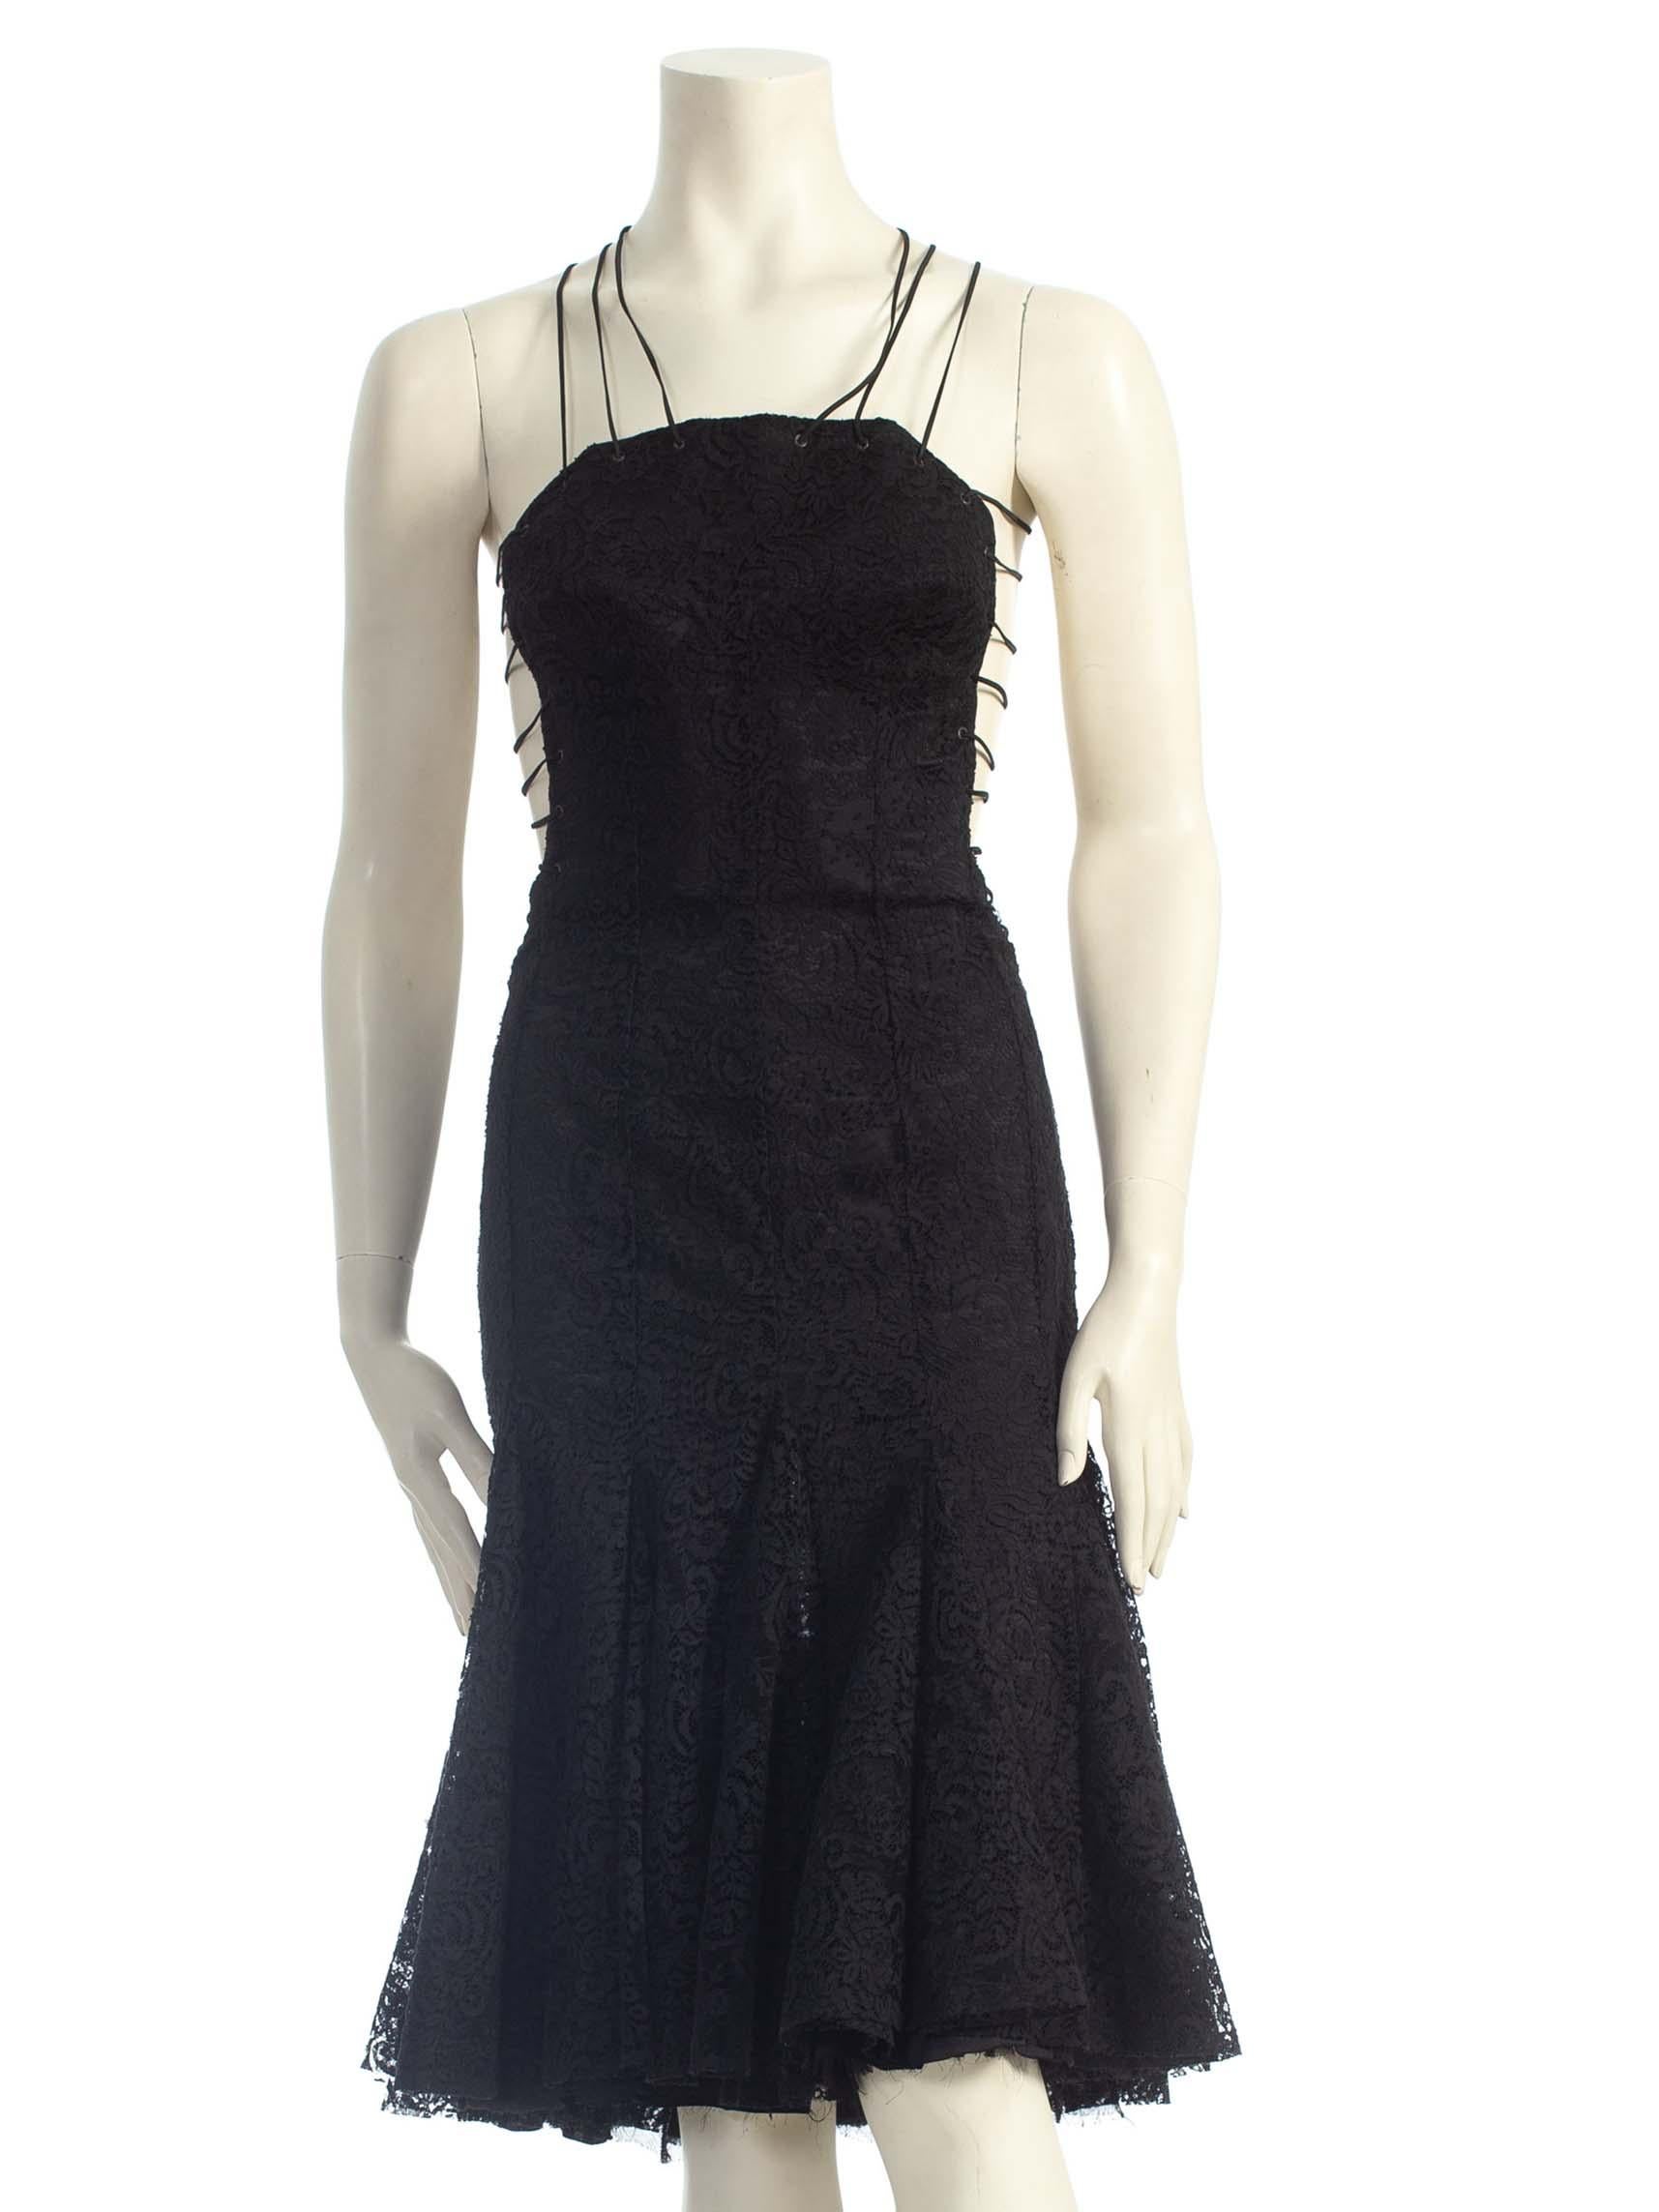 2000S ALEXANDER MCQUEEN Black Backless Rayon & Silk Lace Cocktail Dress With Shredded Hem